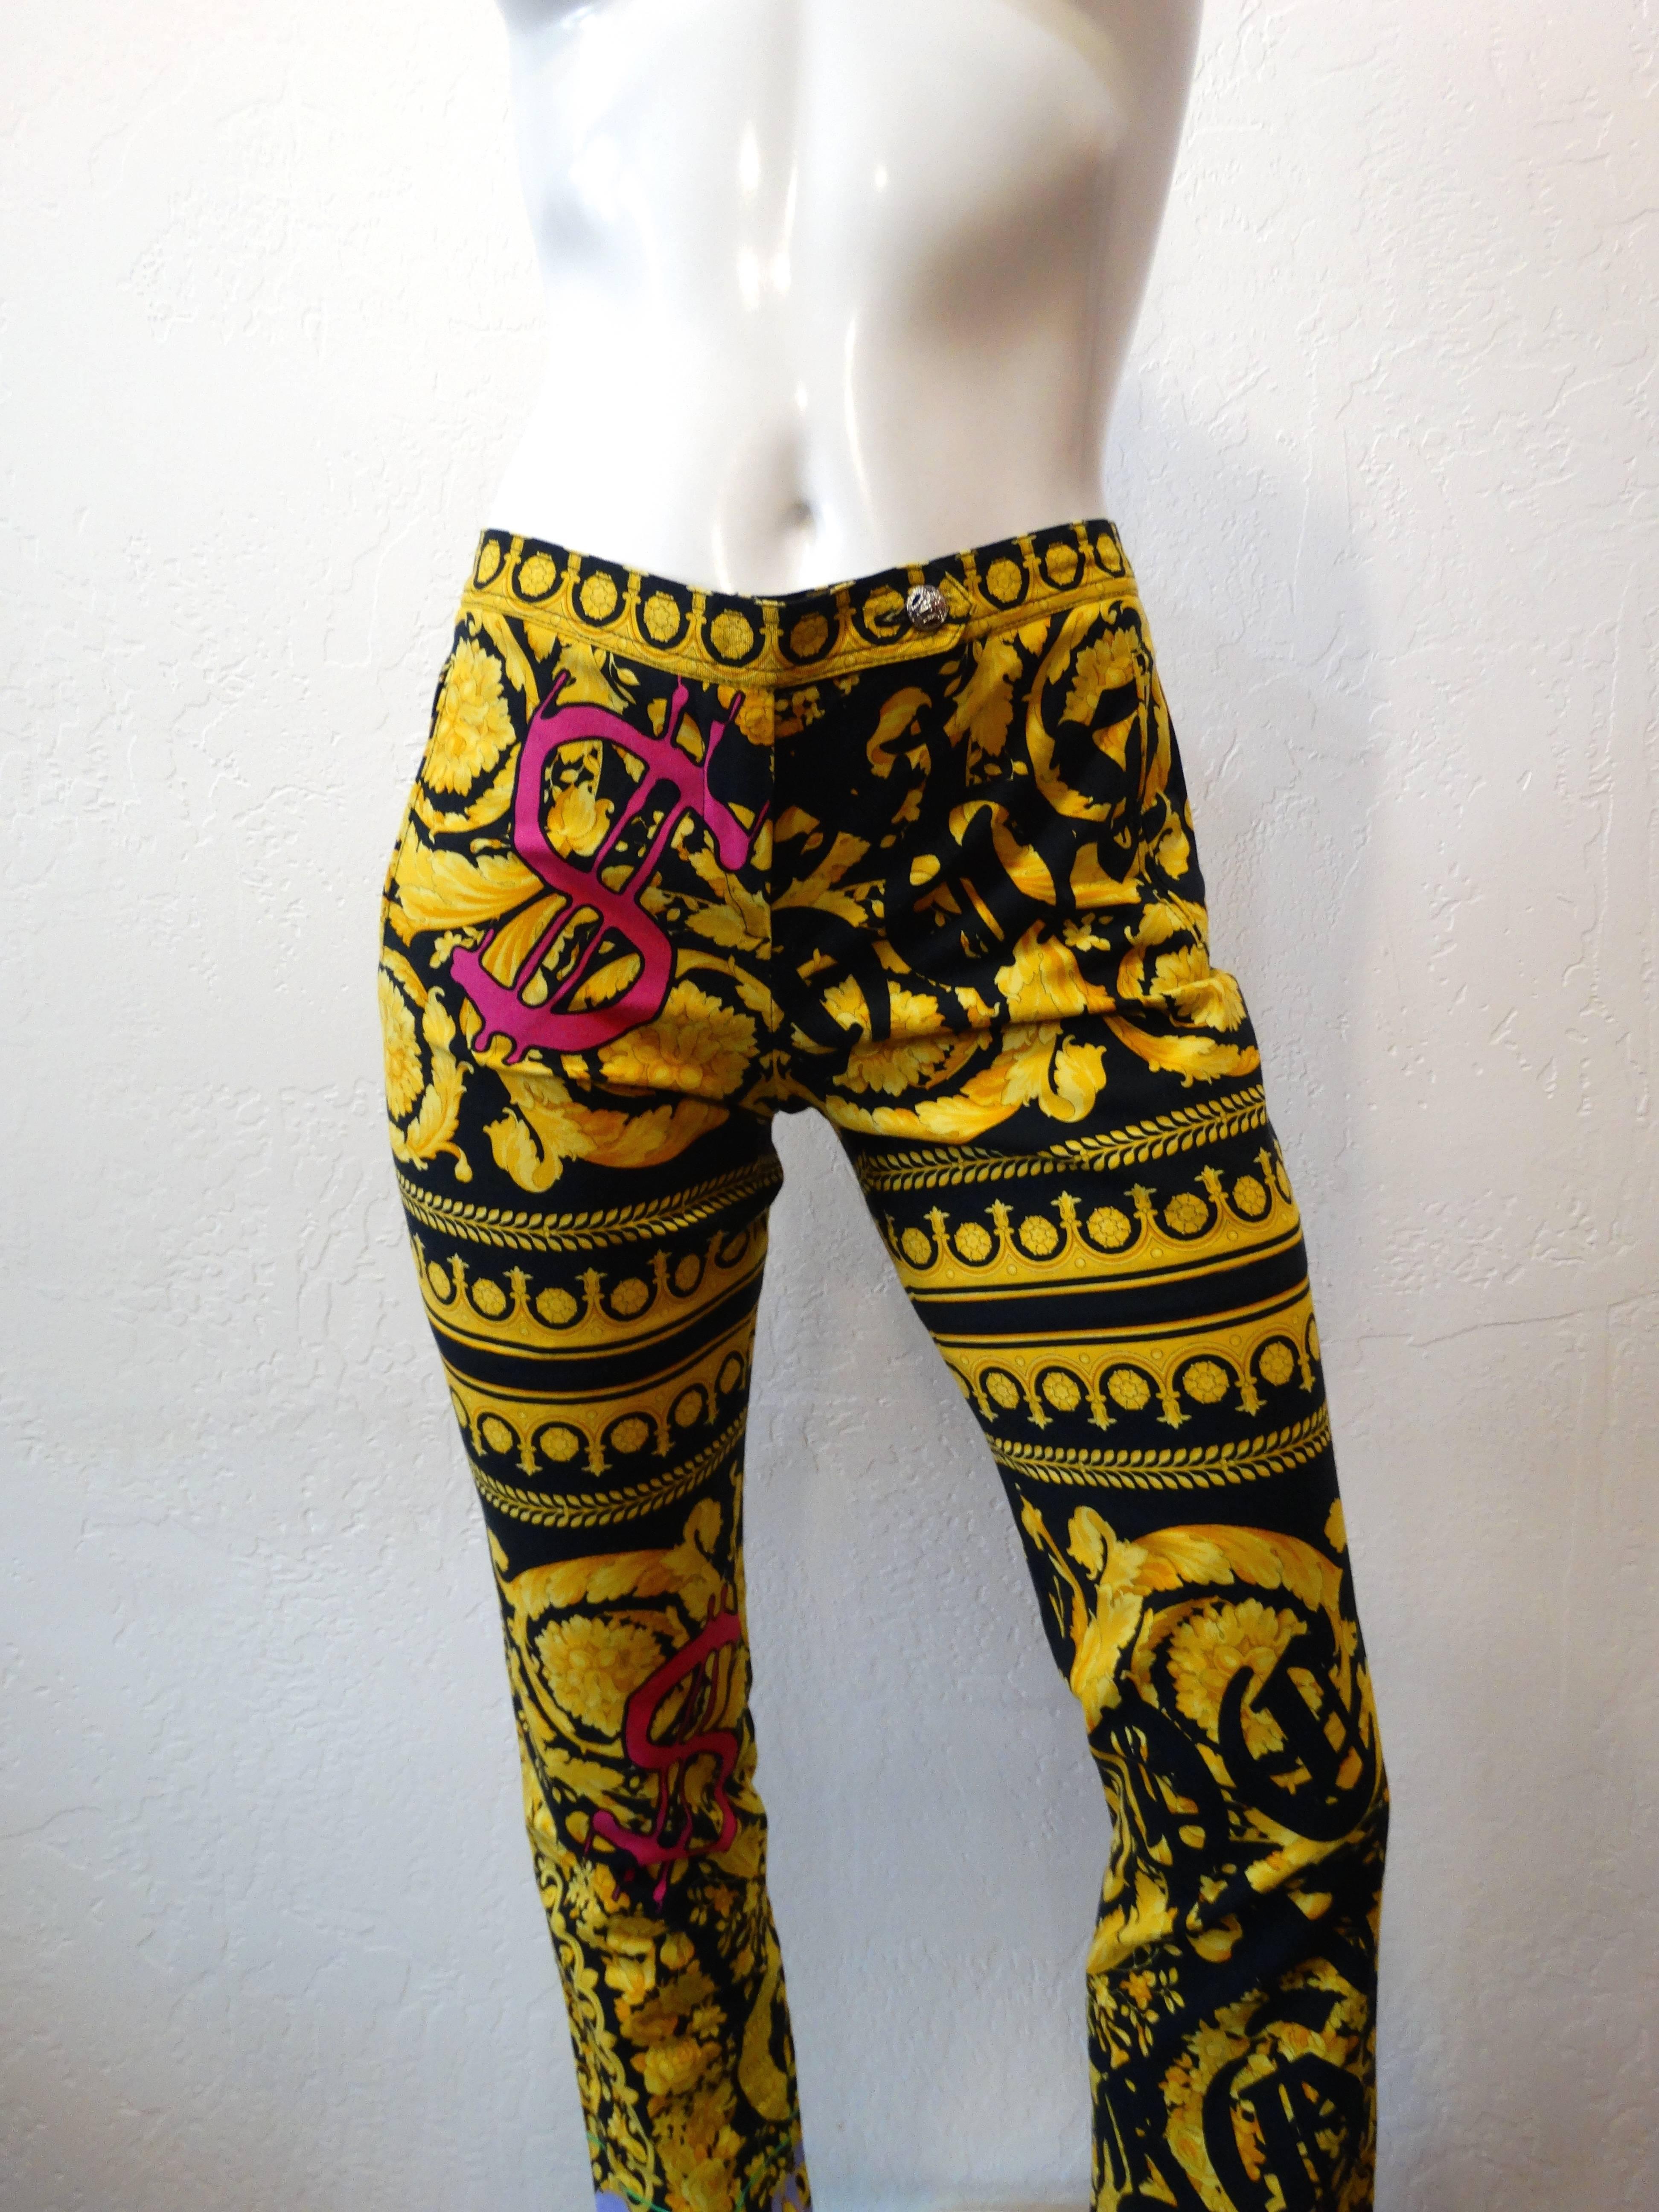 Channel your inner wild child with our 1990s Versace printed pants! Woven cotton printed all over in black and gold classic Versace baroque pattern accented with pink, green, and lavender graffiti inspired designs. Mid rise fit with tapered leg fit.